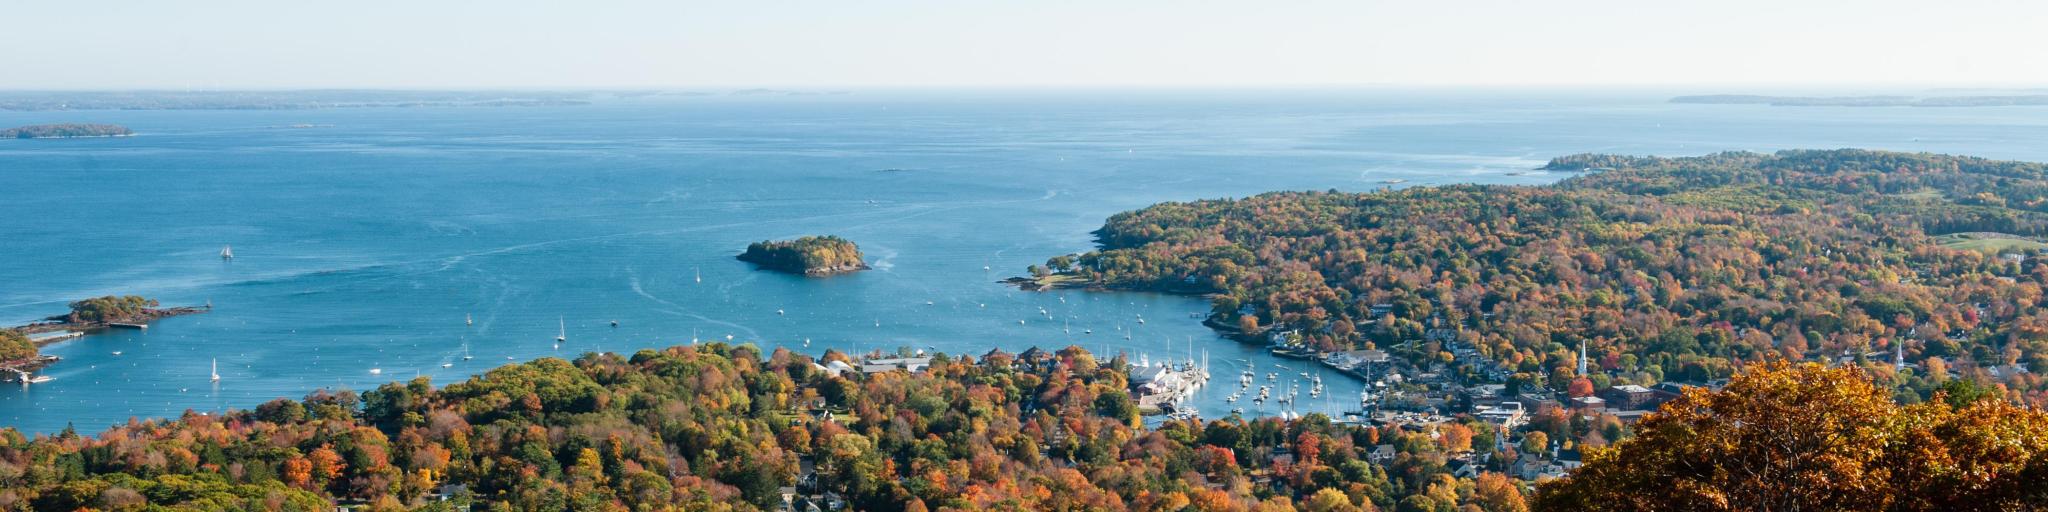 Camden Hills State Park, Maine in autumn with a view of the harbour from the summit of Mount Battie in the foreground against a blue sky and the sea in the distance. 